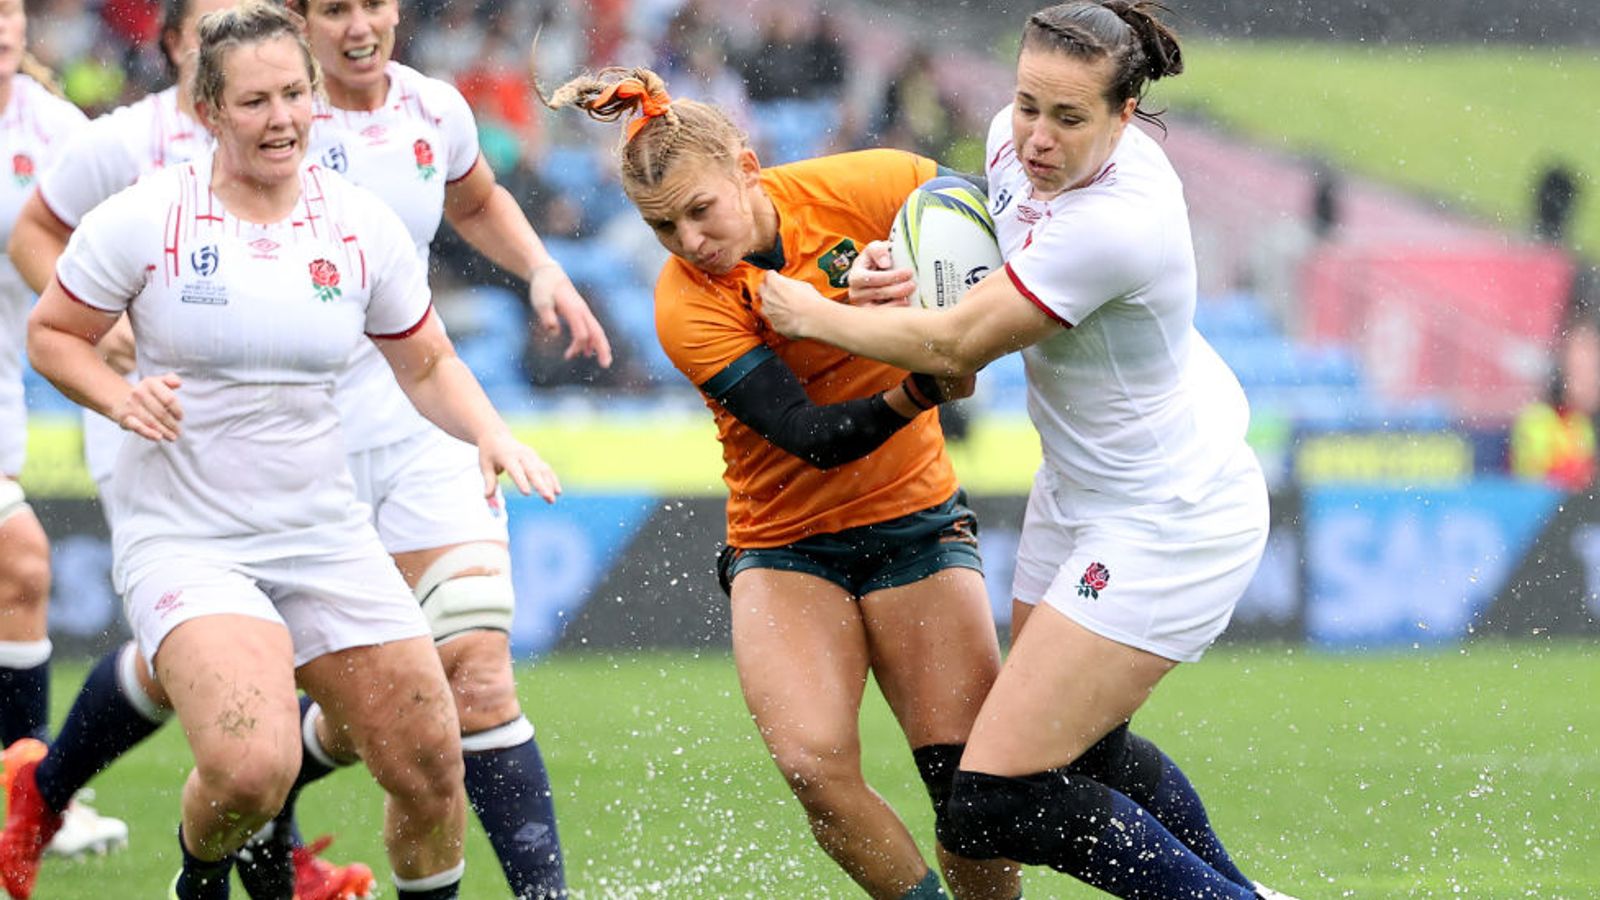 Rugby World Cup: England show variety in awful conditions to reach semis, plus Marlie Packer’s main motivation